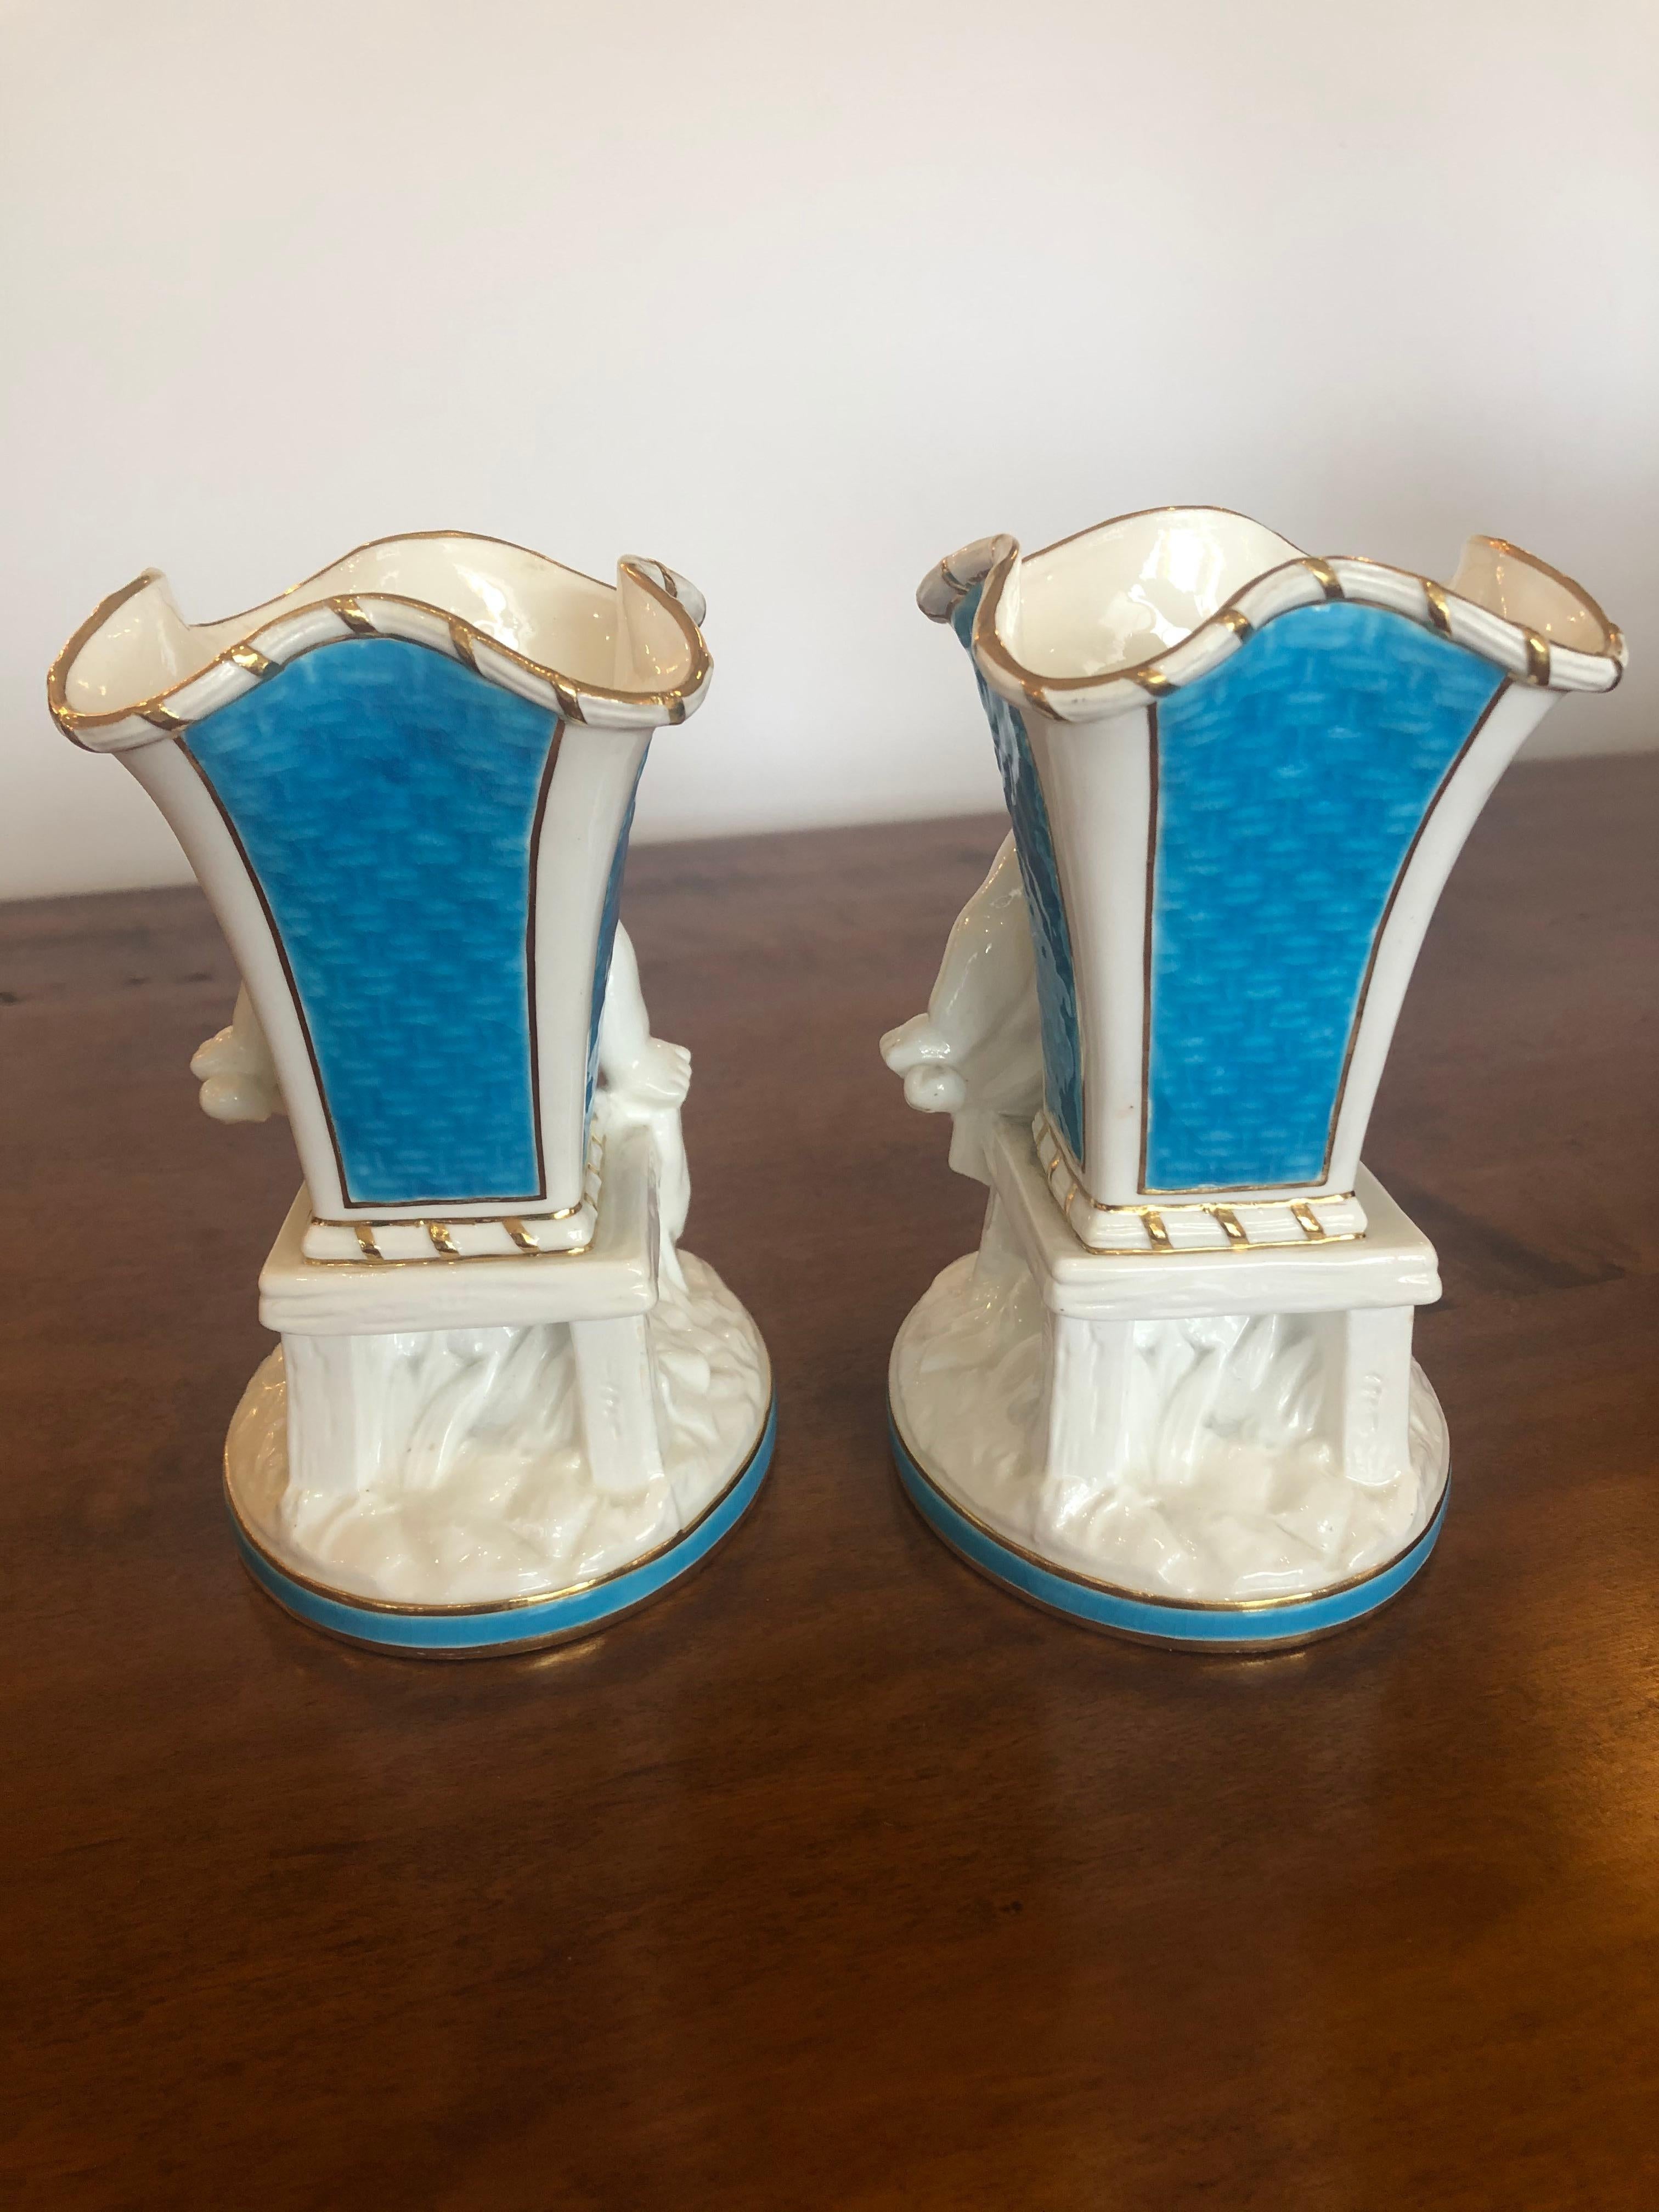 Superb Rare Pair of Cherub Minton Caldwell Tiffany Blue and White Spill Vases For Sale 10